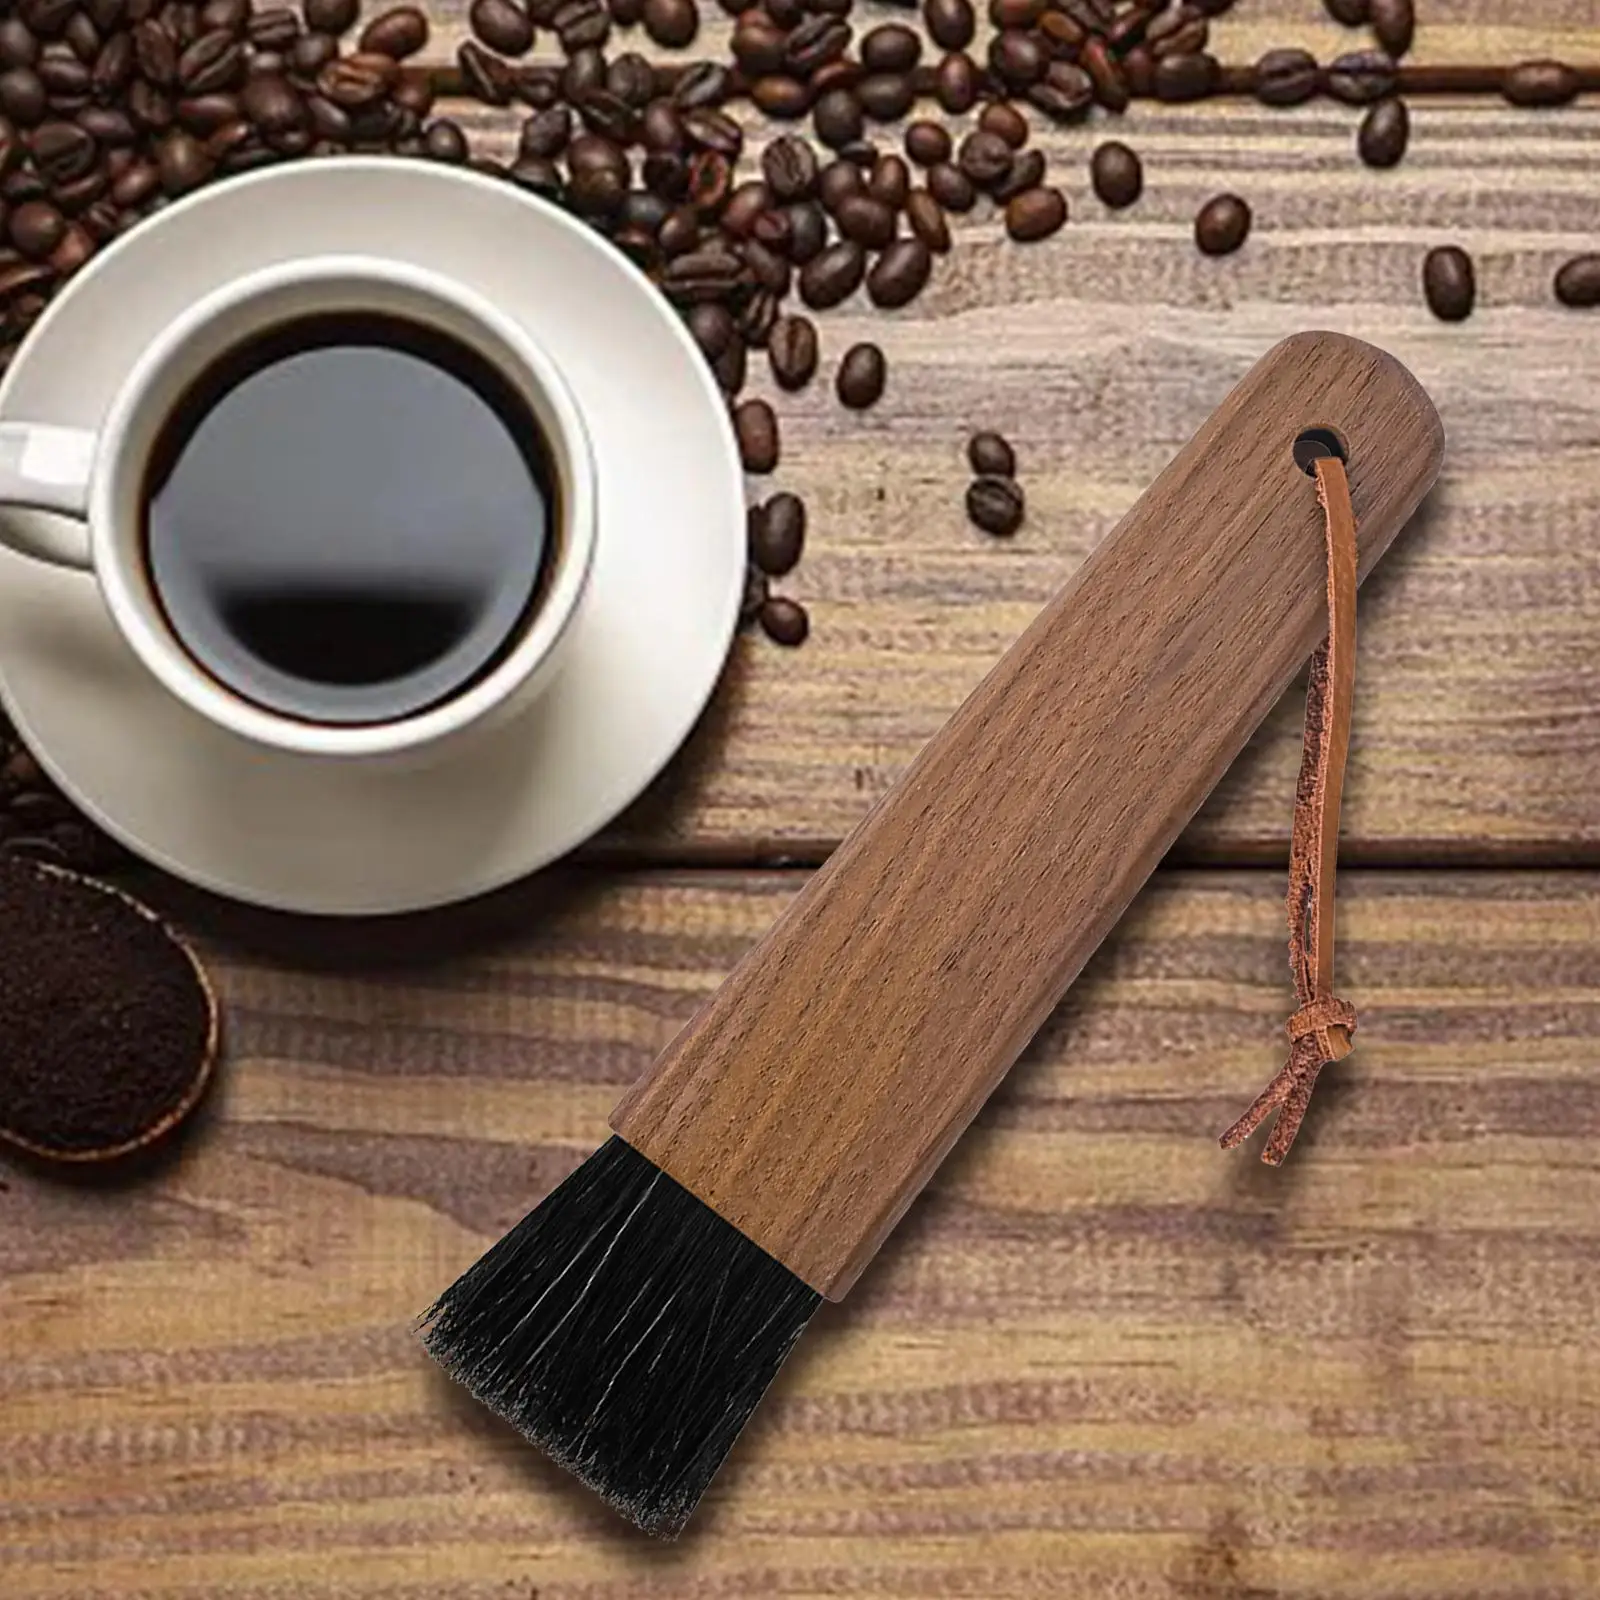 Coffee Grinder Cleaning Brush Tool Espresso Accessories Appliance Washing